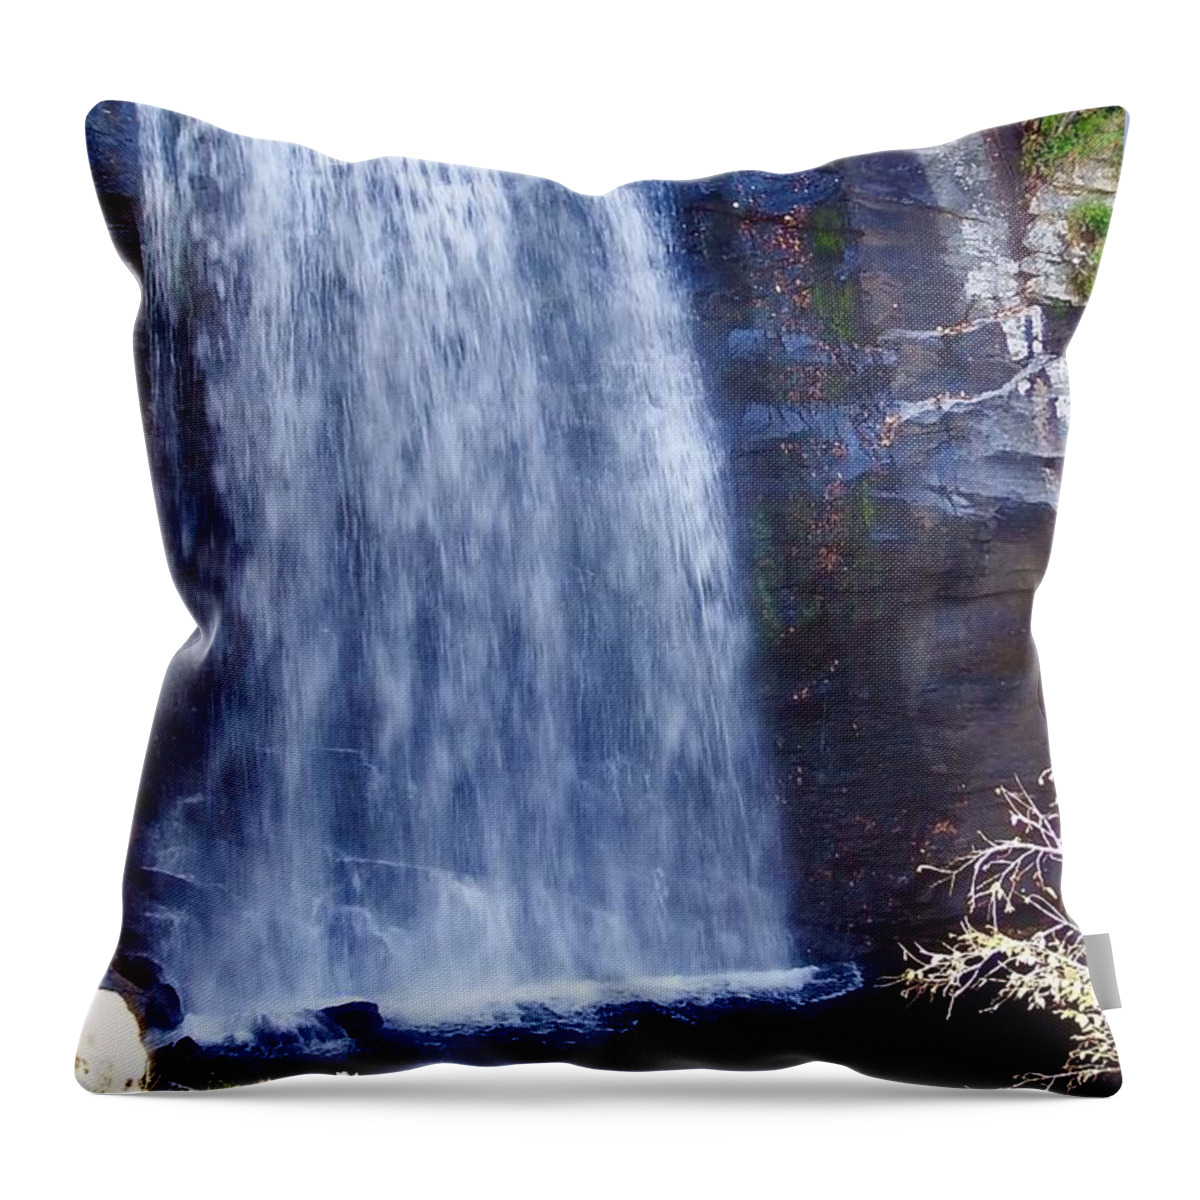 Forest Throw Pillow featuring the photograph Looking Glass Falls 2016 by Cathy Harper